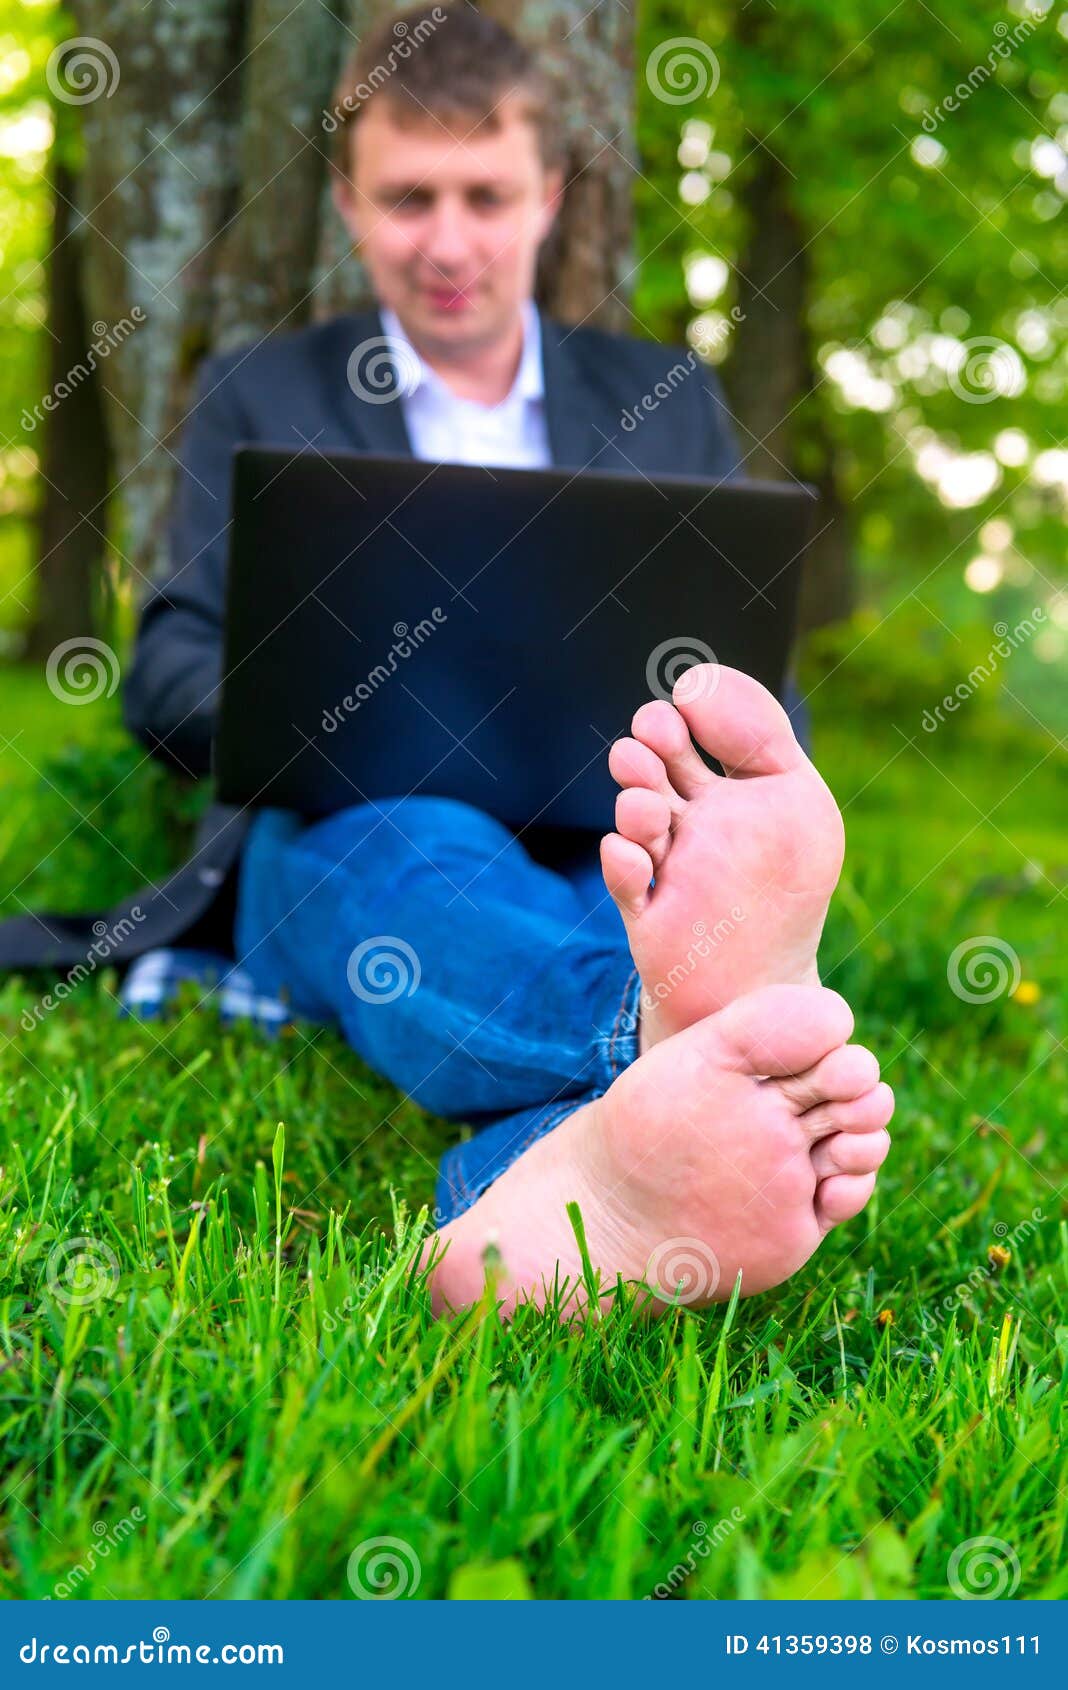 Focus On Bare Feet Of A Businessman Stock Photo - Image: 41359398